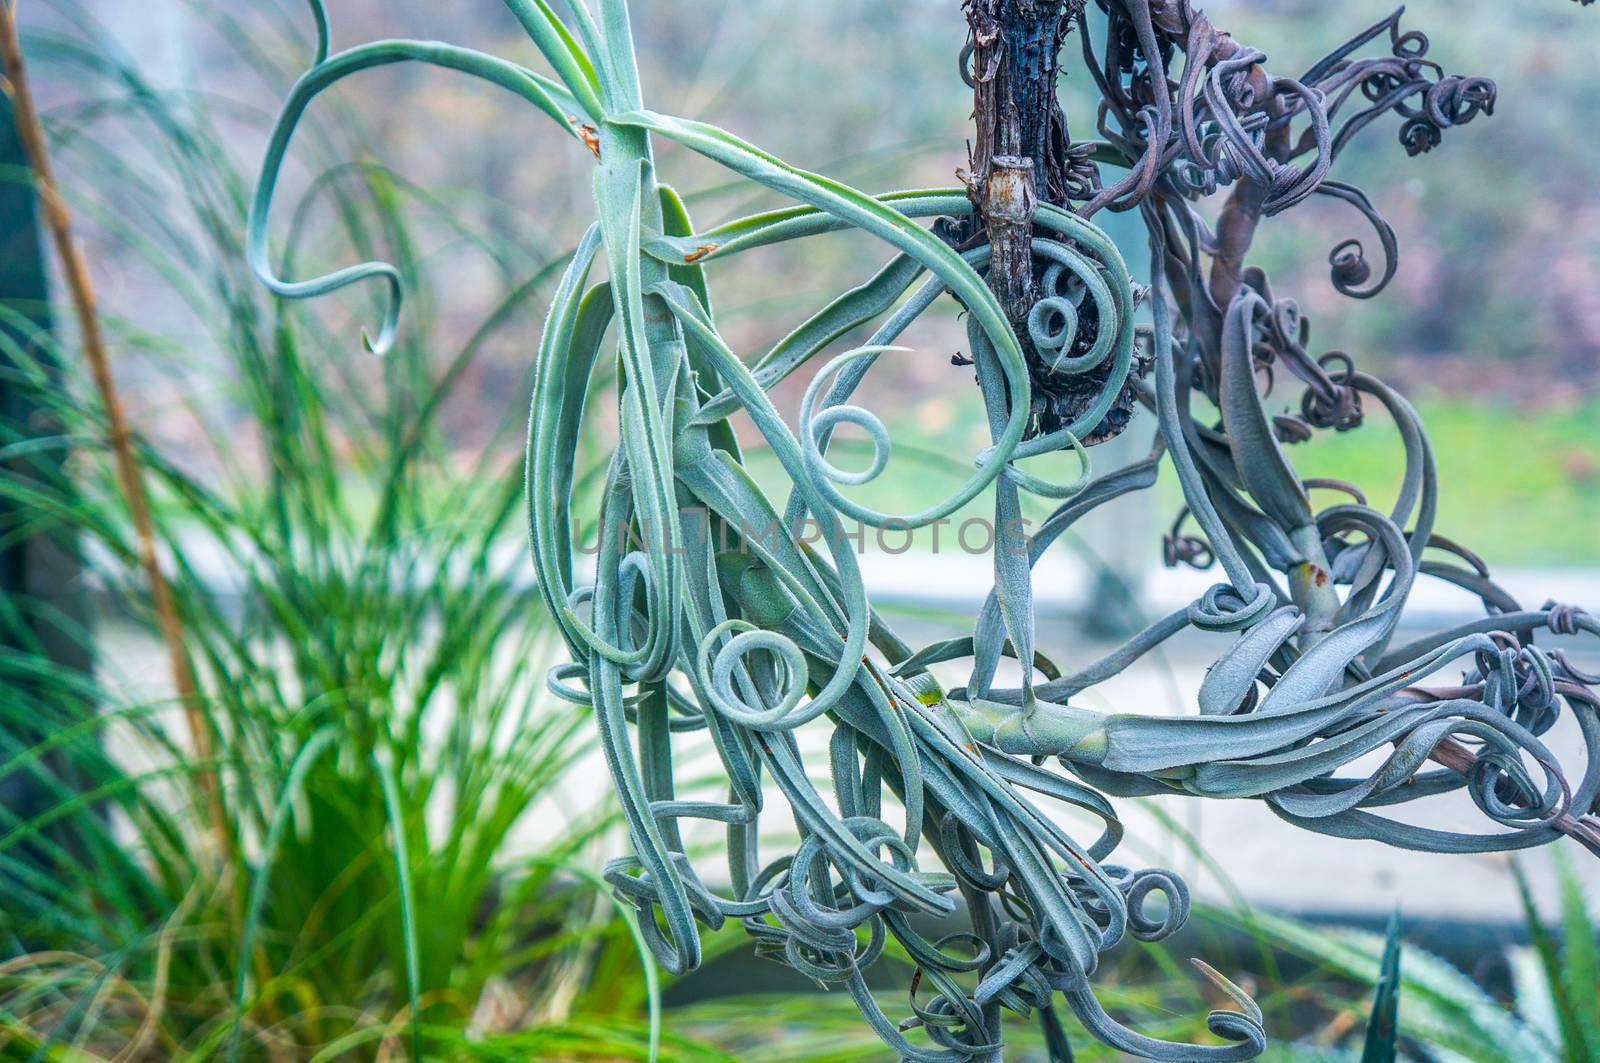 Curly mint green "tillandsia duratii" rainforest plant hanging in macro. Shot in natural daylight with green plants in the blurred background.